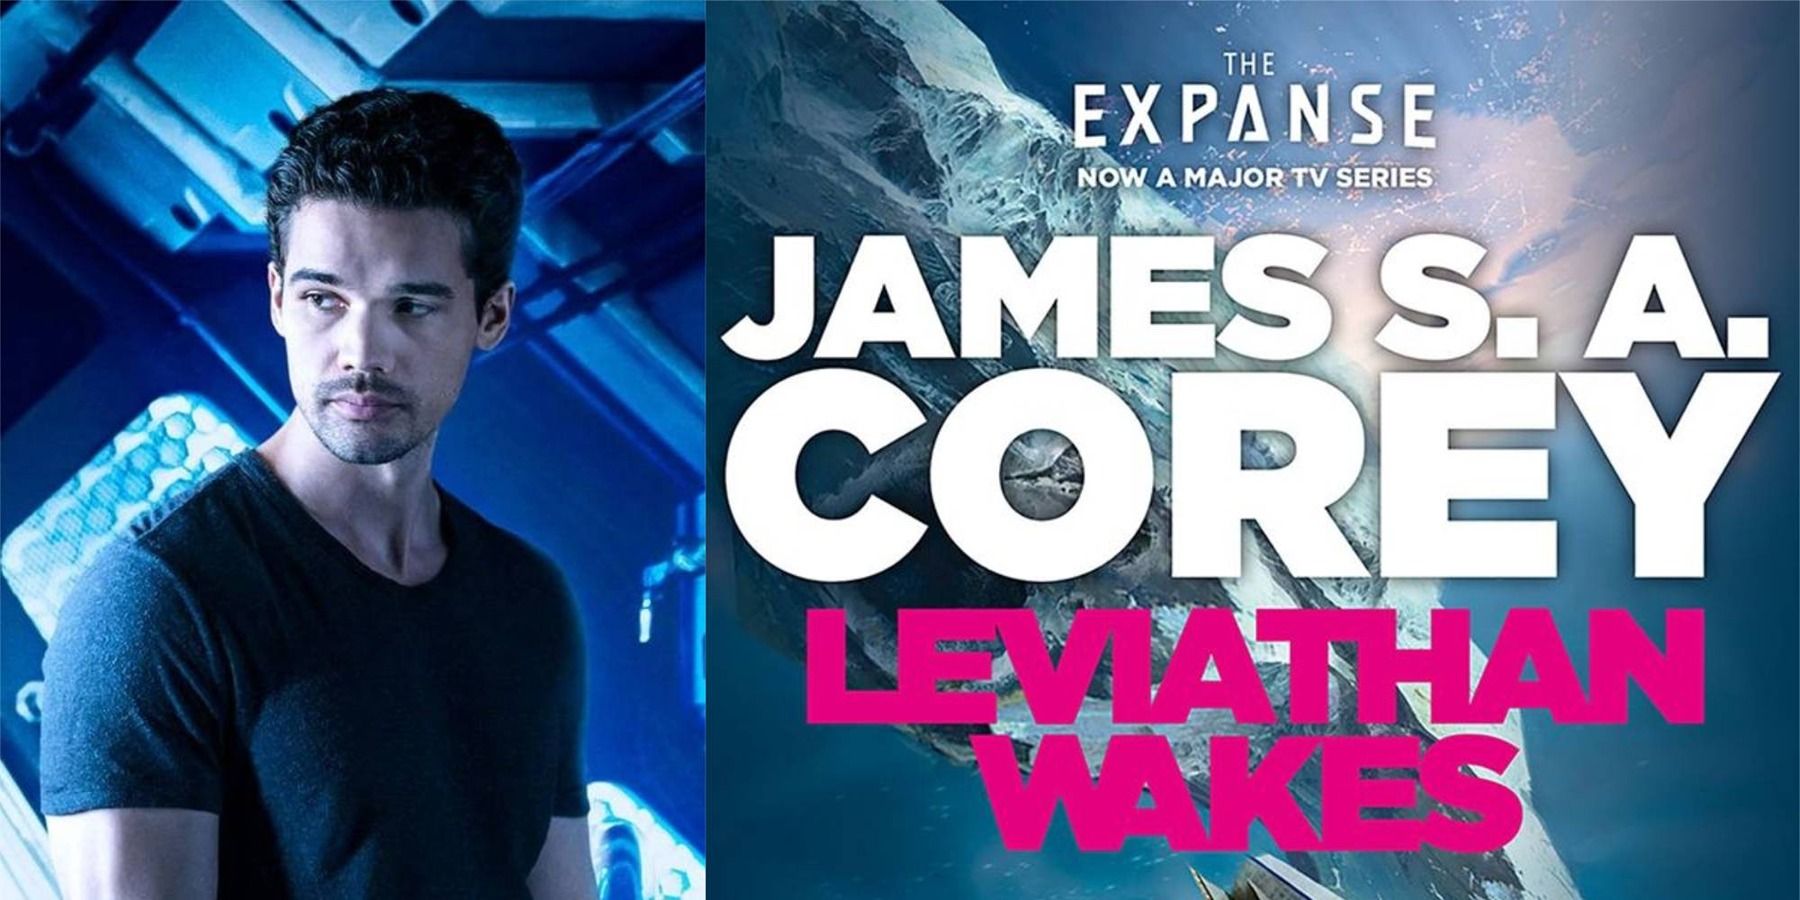 the expanse: why you should read the books if you loved the show1